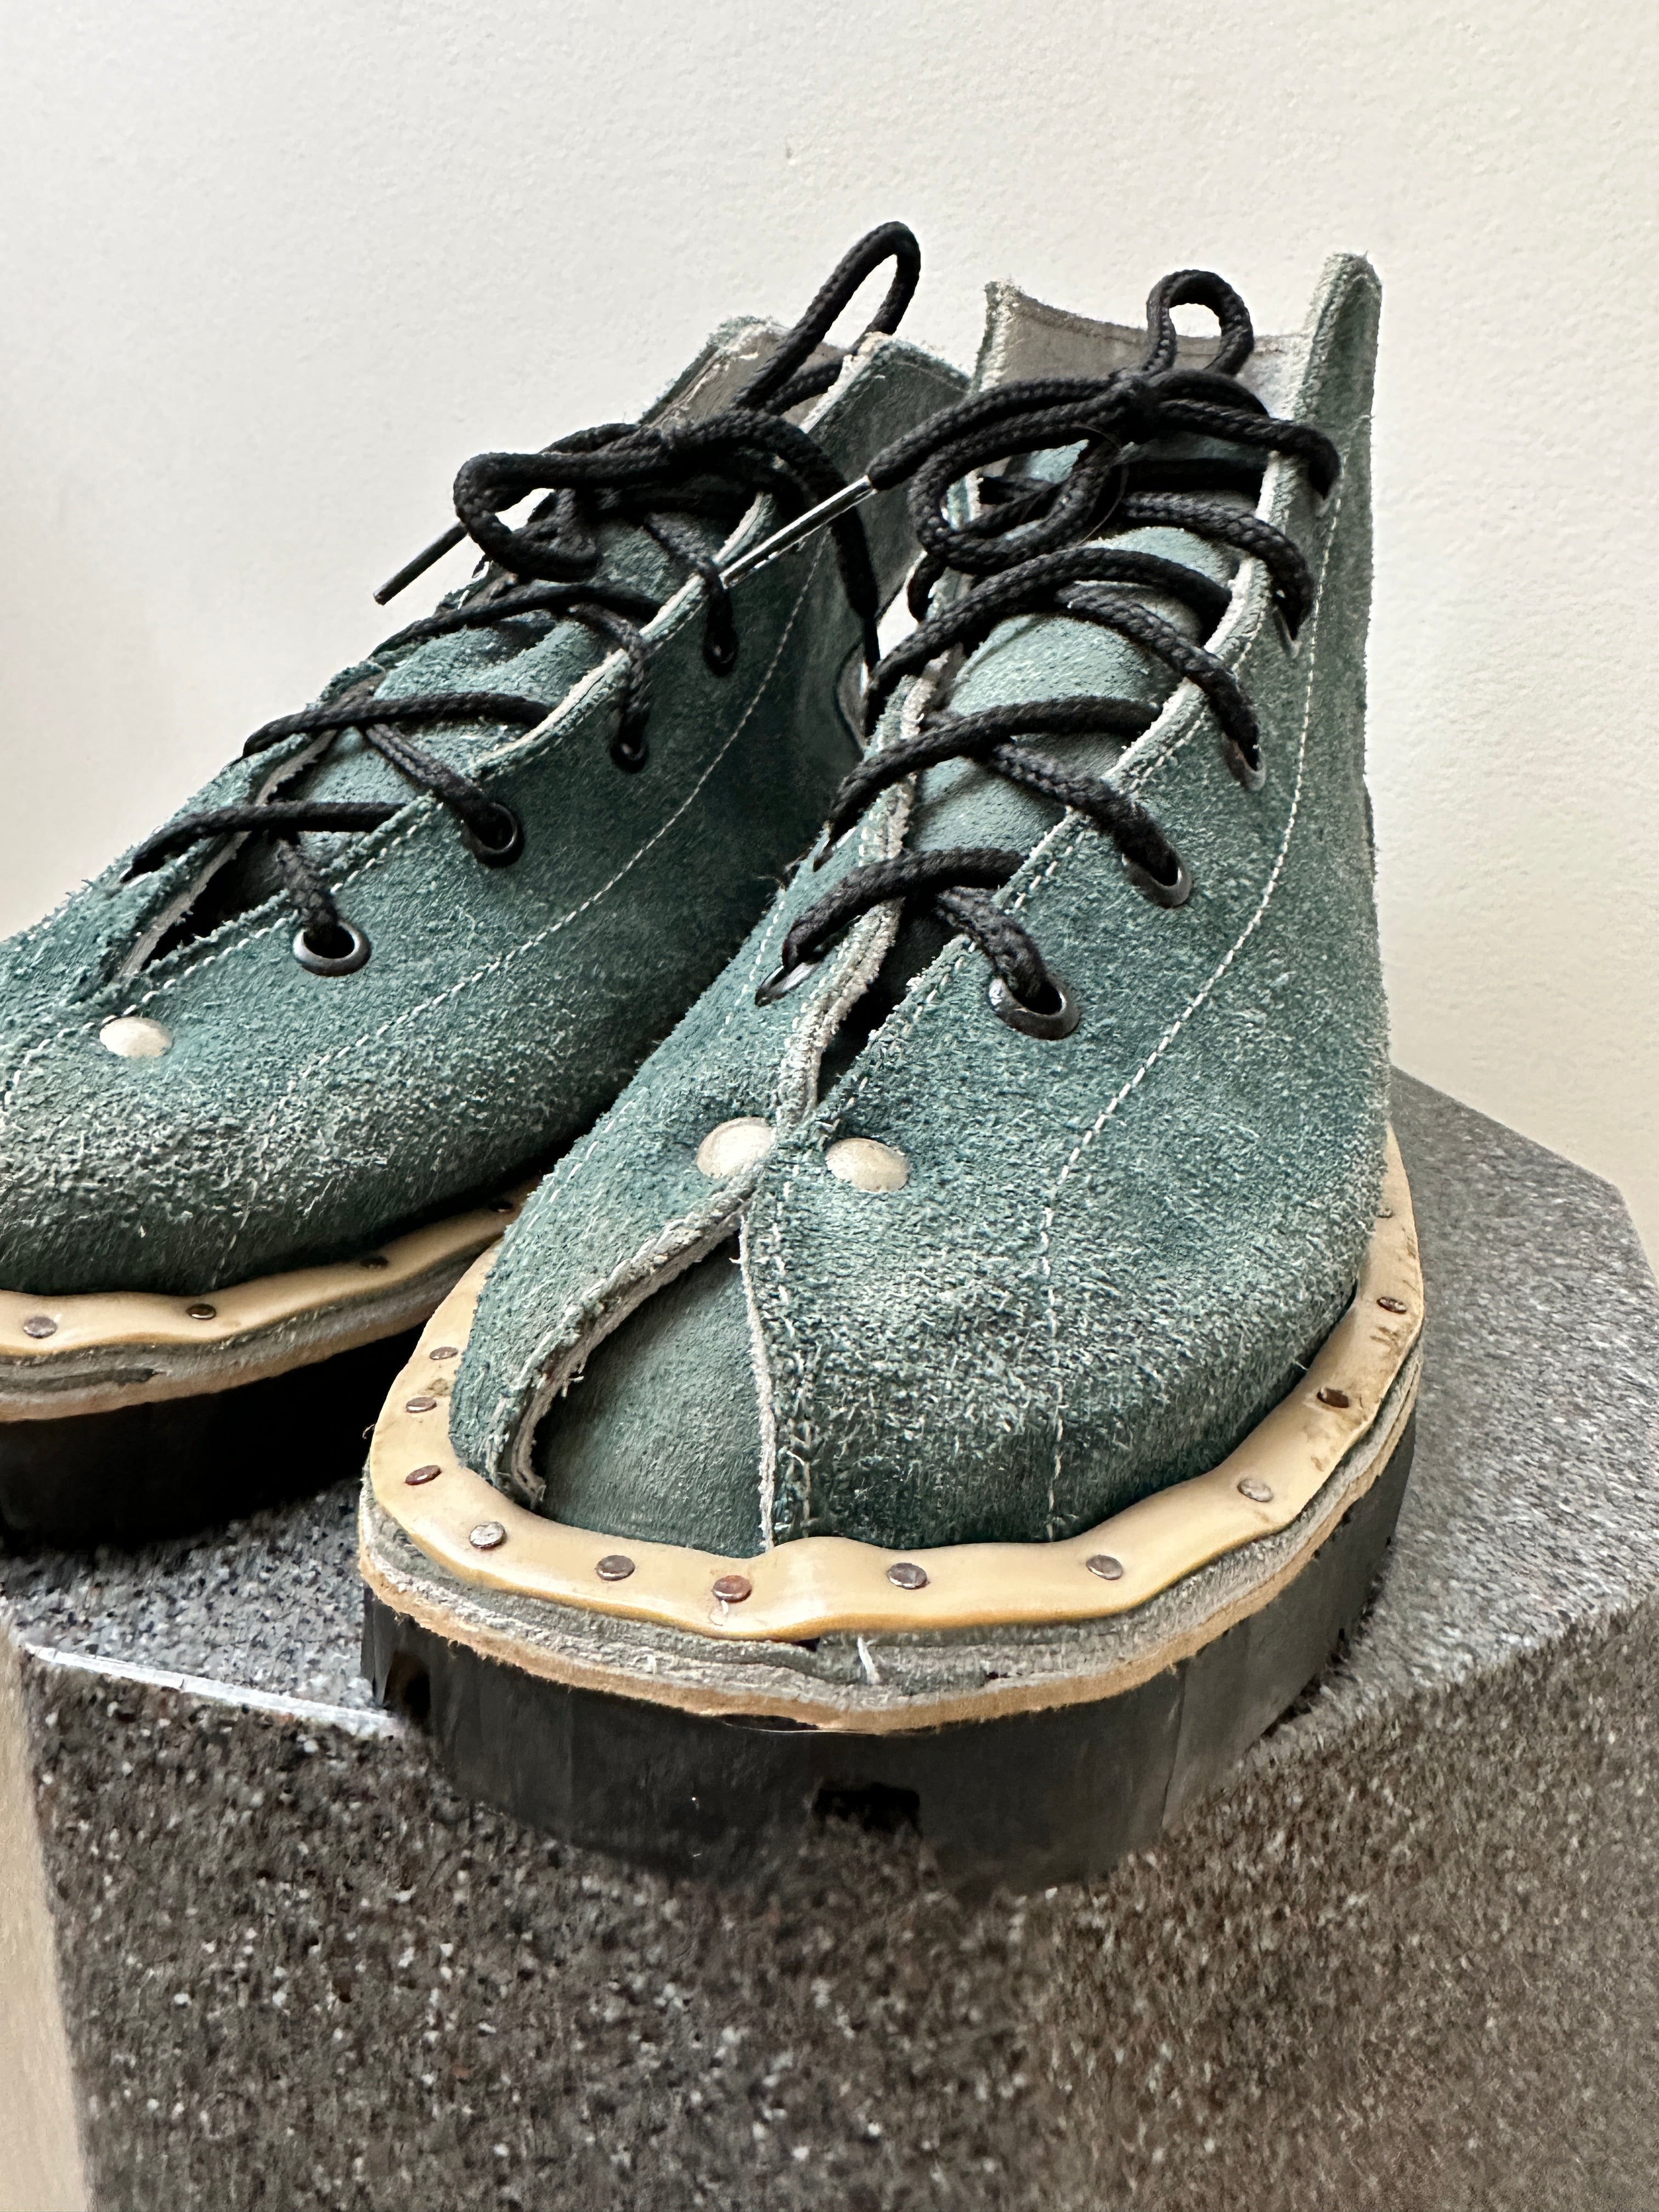 Future Nomads Shoes Teal / 42 Handmade Boots With Tyre Sole Teal